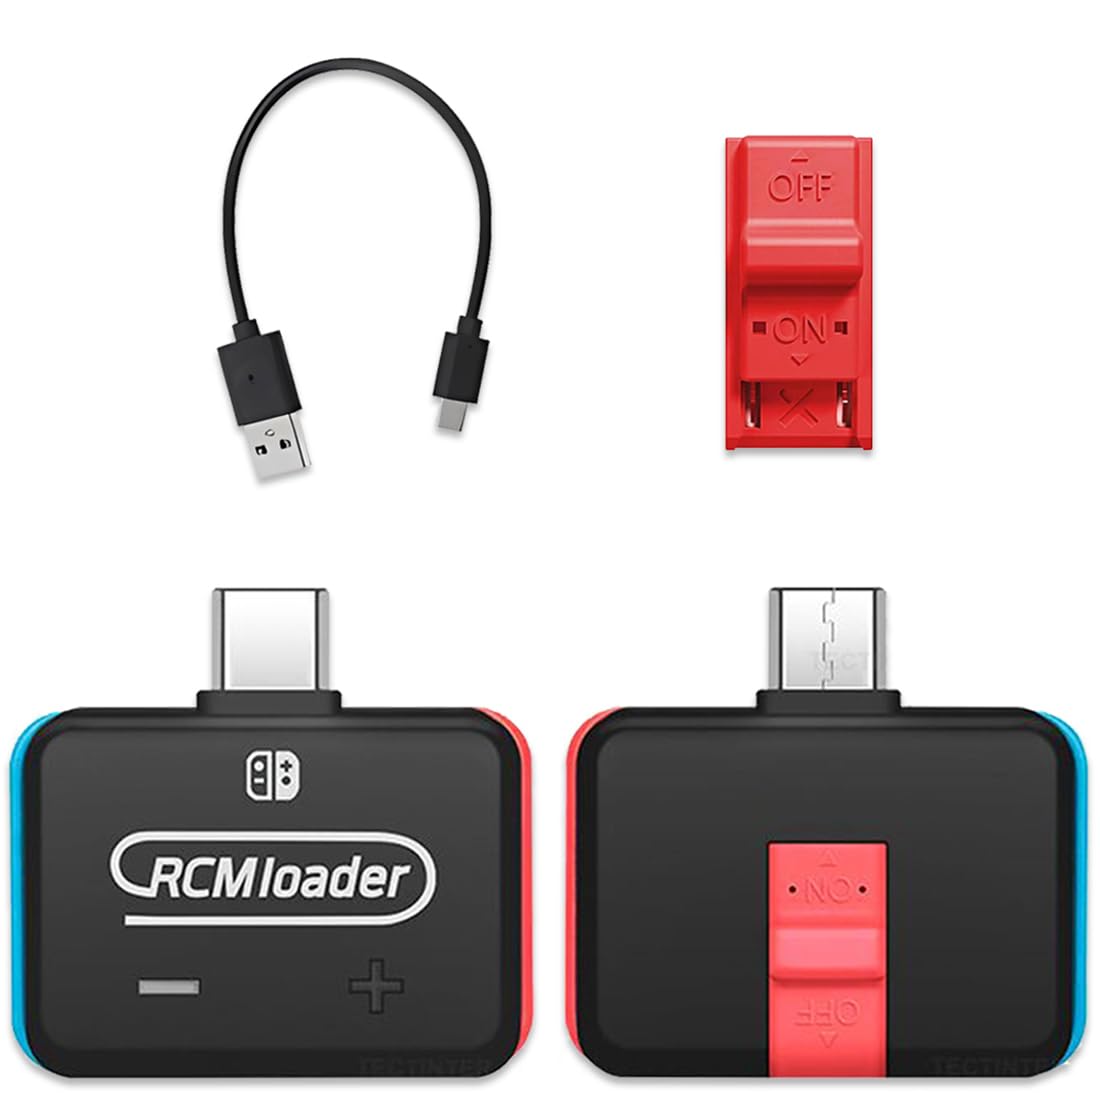 RCM Loader, Switch RCM Loader Payloads Injector Tool Sets, RCM Jig Boot into CFW for Switch, Built-in ReiNX, SX and Hekate Including Injector, Jig, Micro USB Cable